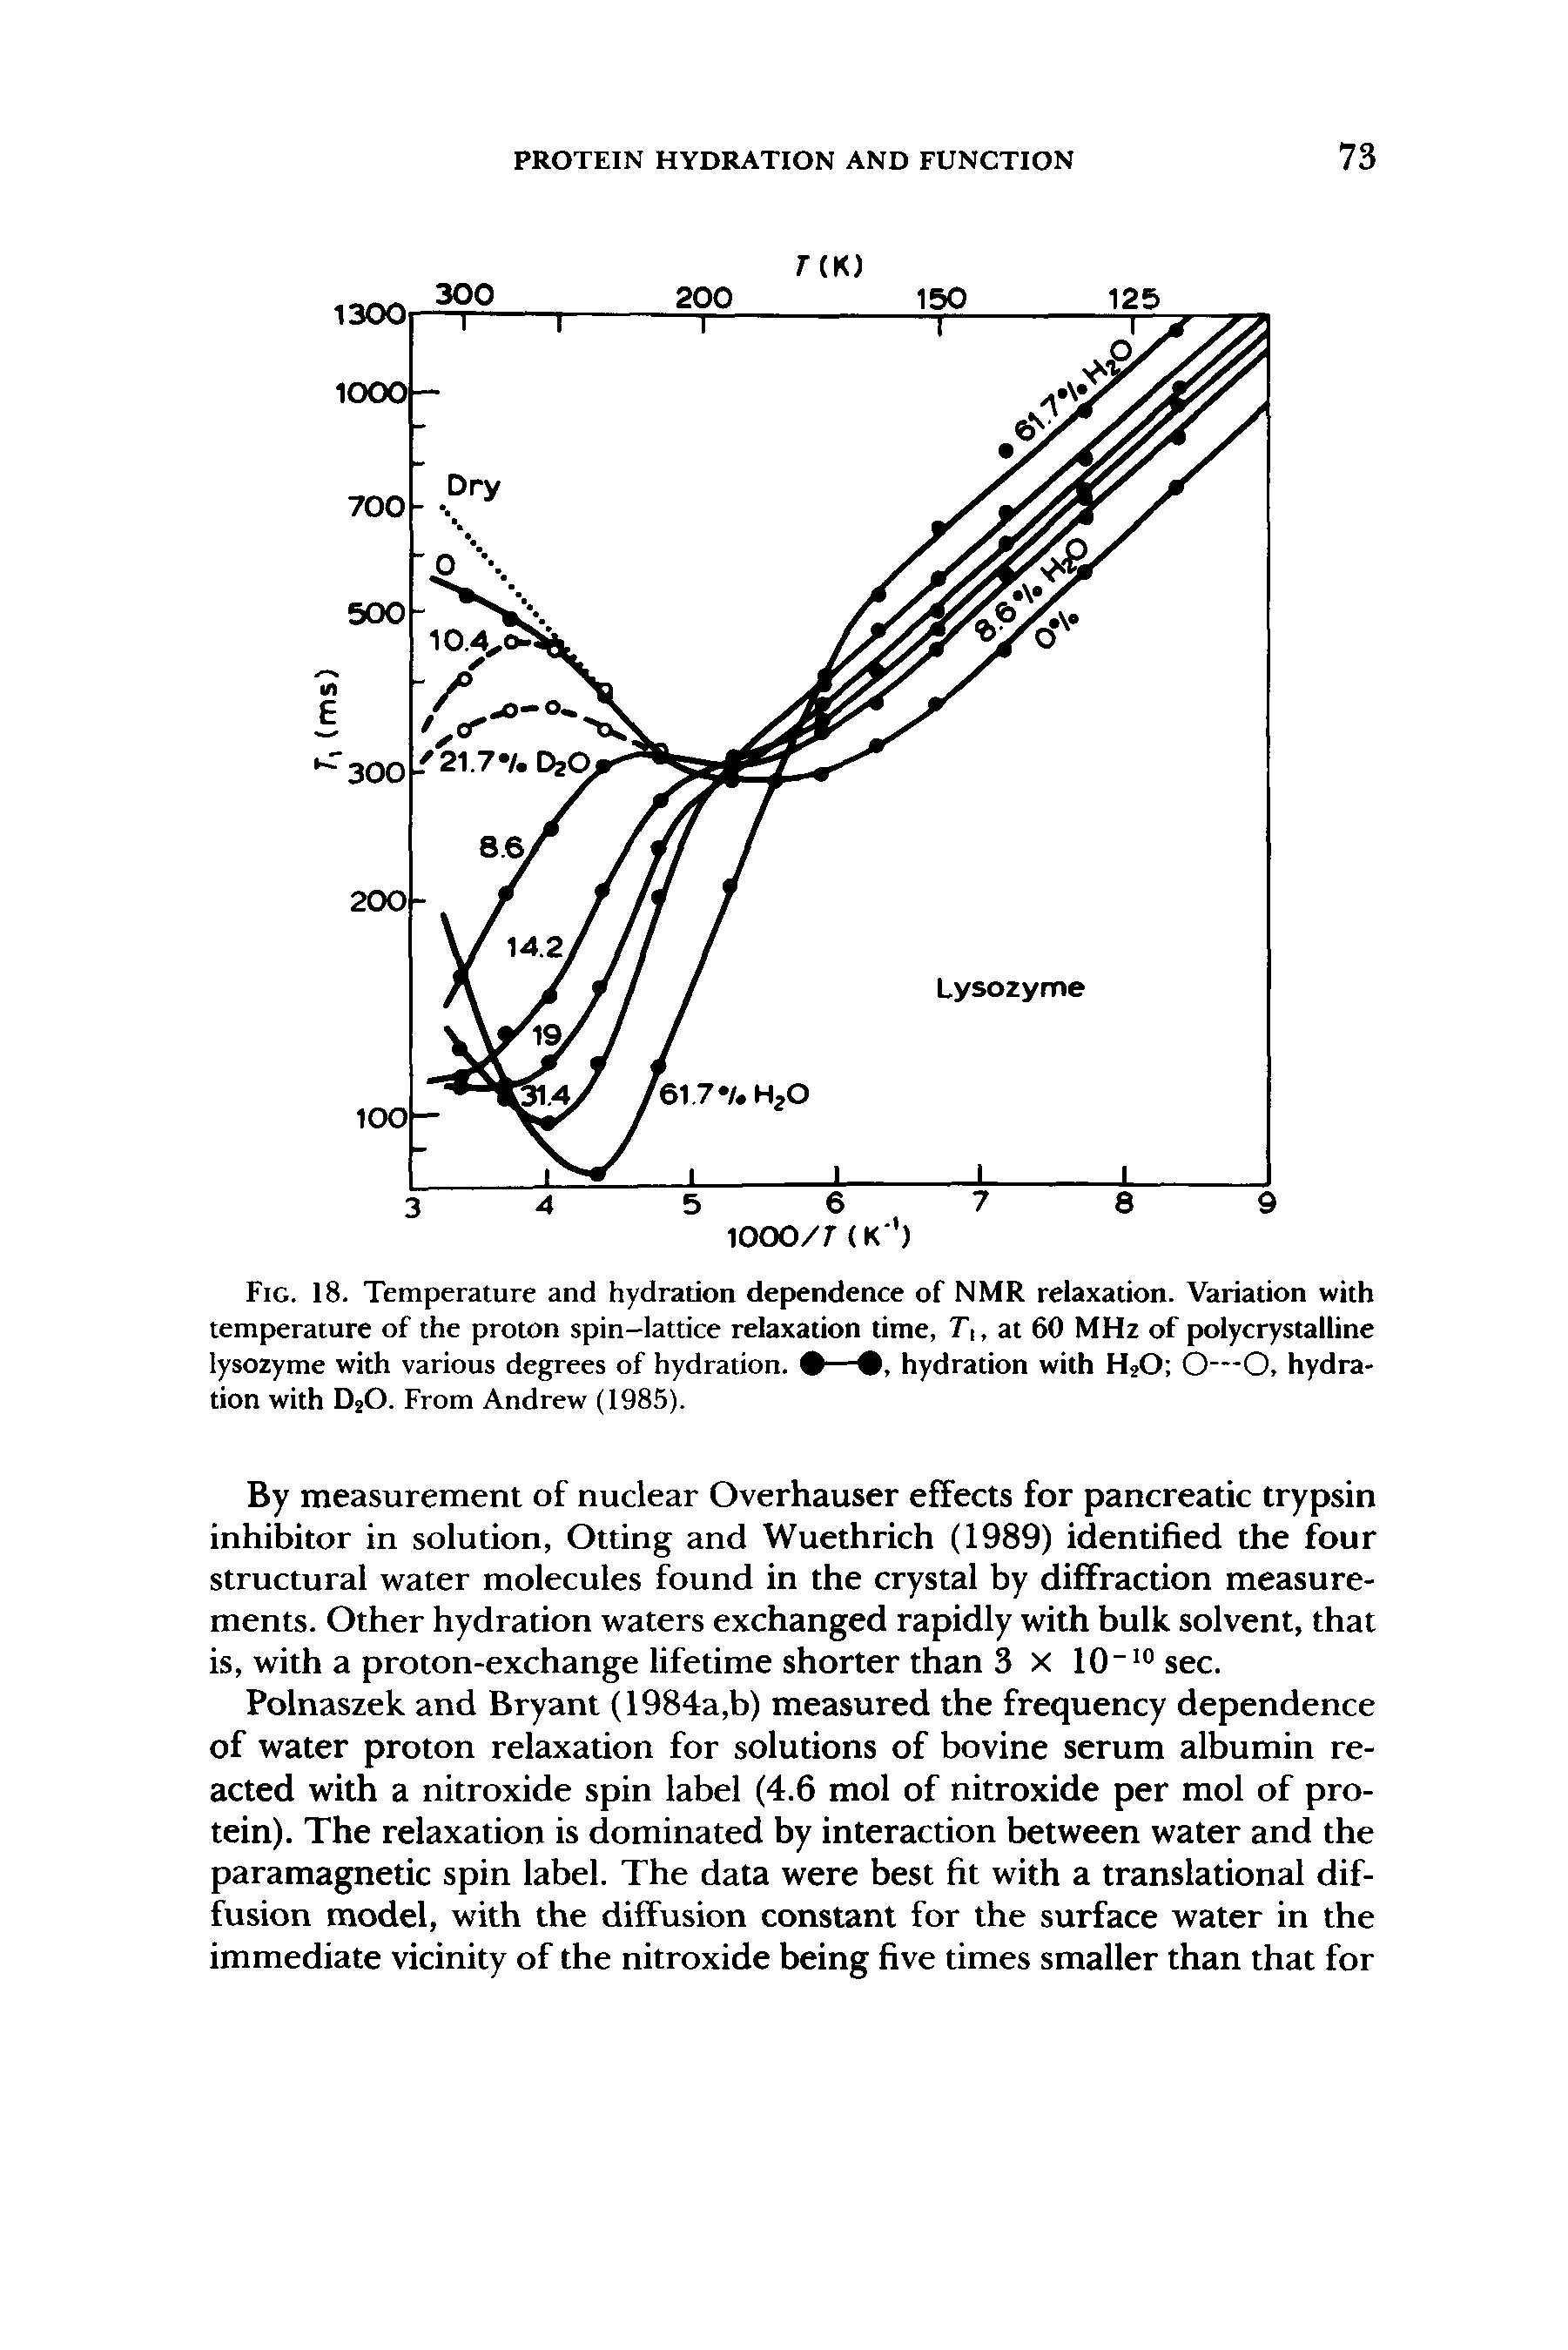 Fig. 18. Temperature and hydration dependence of NMR relaxation. Variation with temperature of the proton spin-lattice relaxation time, T, at 60 MHz of polycrystalline lysozyme with various degrees of hydration. —, hydration with HjO 0—0, hydration with D2O. From Andrew (1985).